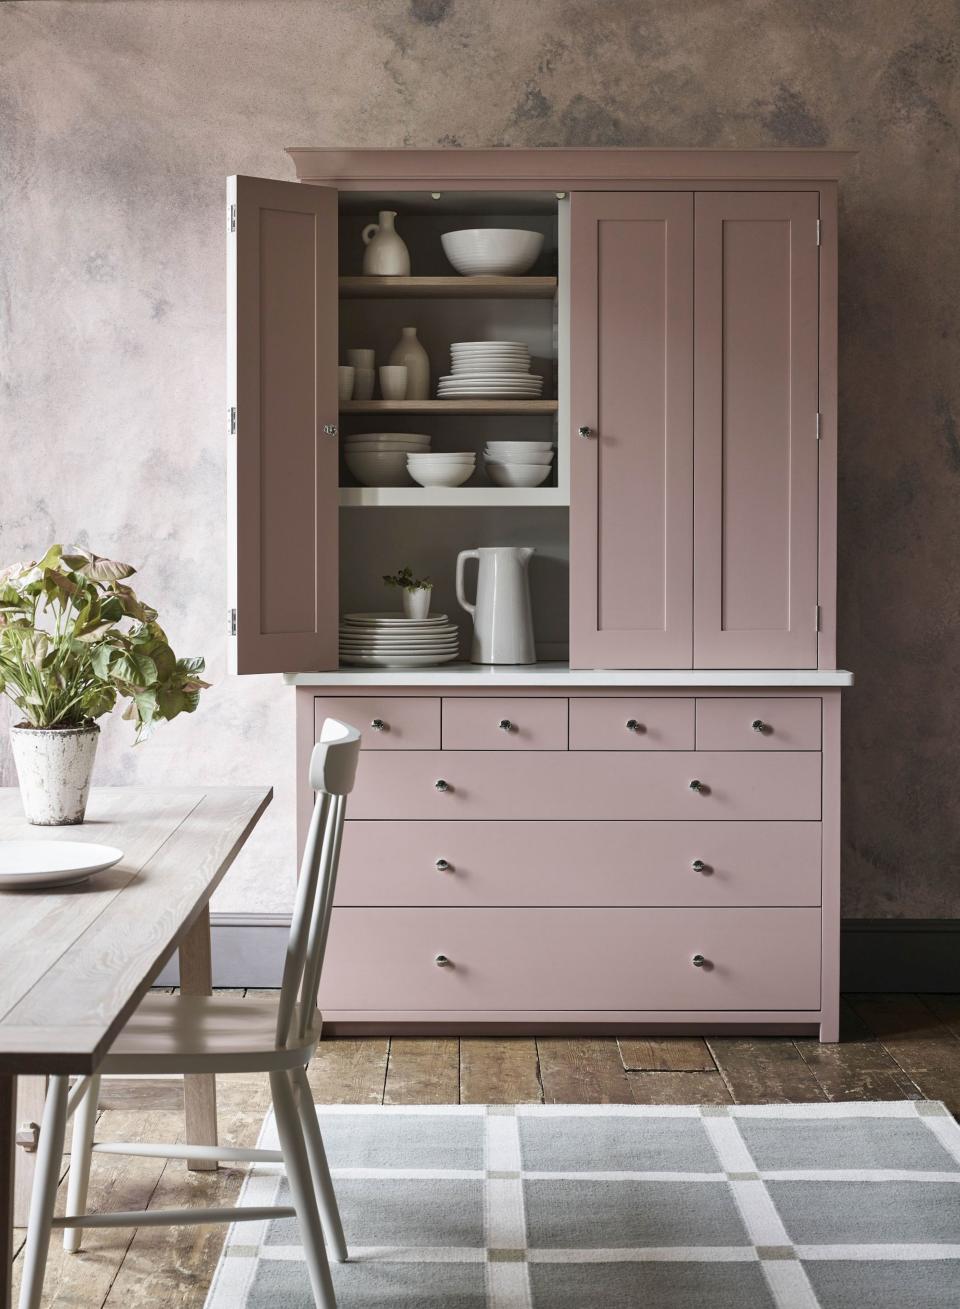 <p> If you love the idea of a walk-in-pantry, but just don&apos;t have the space, you can still have somewhere to hoard your ever-expanding collection of chutneys and sauces with a kitchen pantry. </p> <p> A freestanding pantry will provide plenty of kitchen storage, plus they look gorgeous. We are obsessed with this pink one from Neptune.&#xA0; </p> <p> You could of course get the look on a budget by turning an old cupboard into a freestanding pantry. See, they do make for very stylish kitchen storage solutions, especially when combined with pantry shelving to max out on valuable storage.&#xA0; </p>